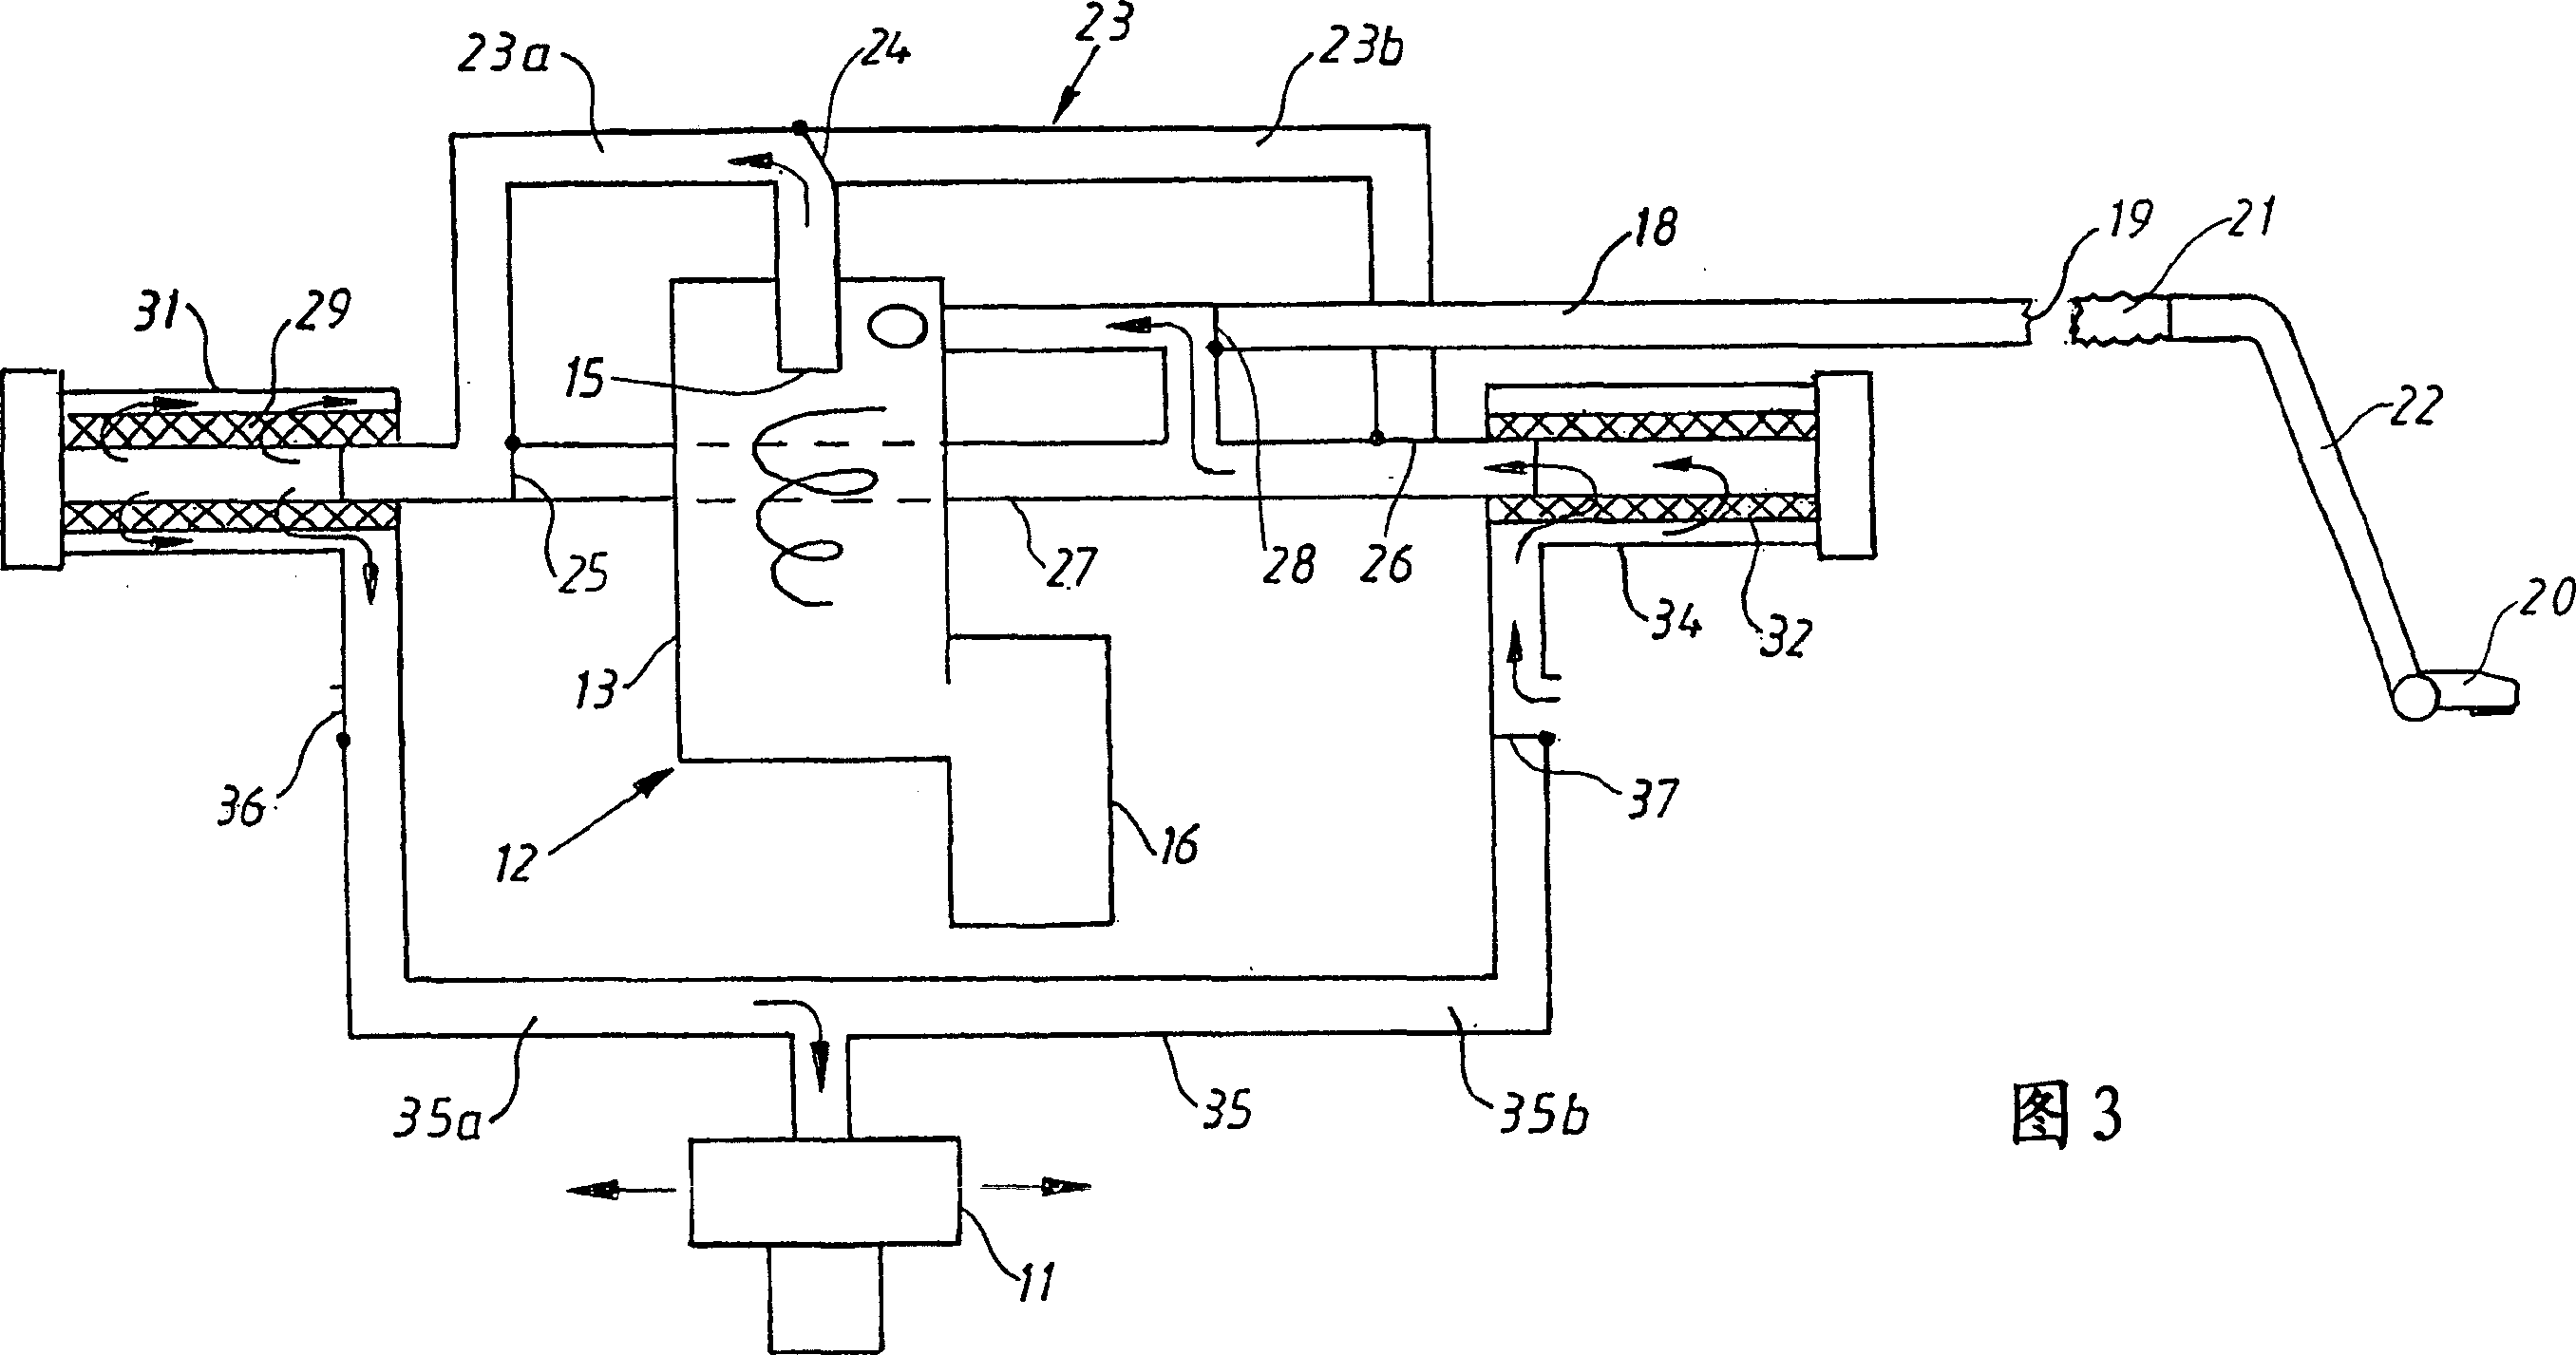 Filter cleaning system for a vacuum cleaner